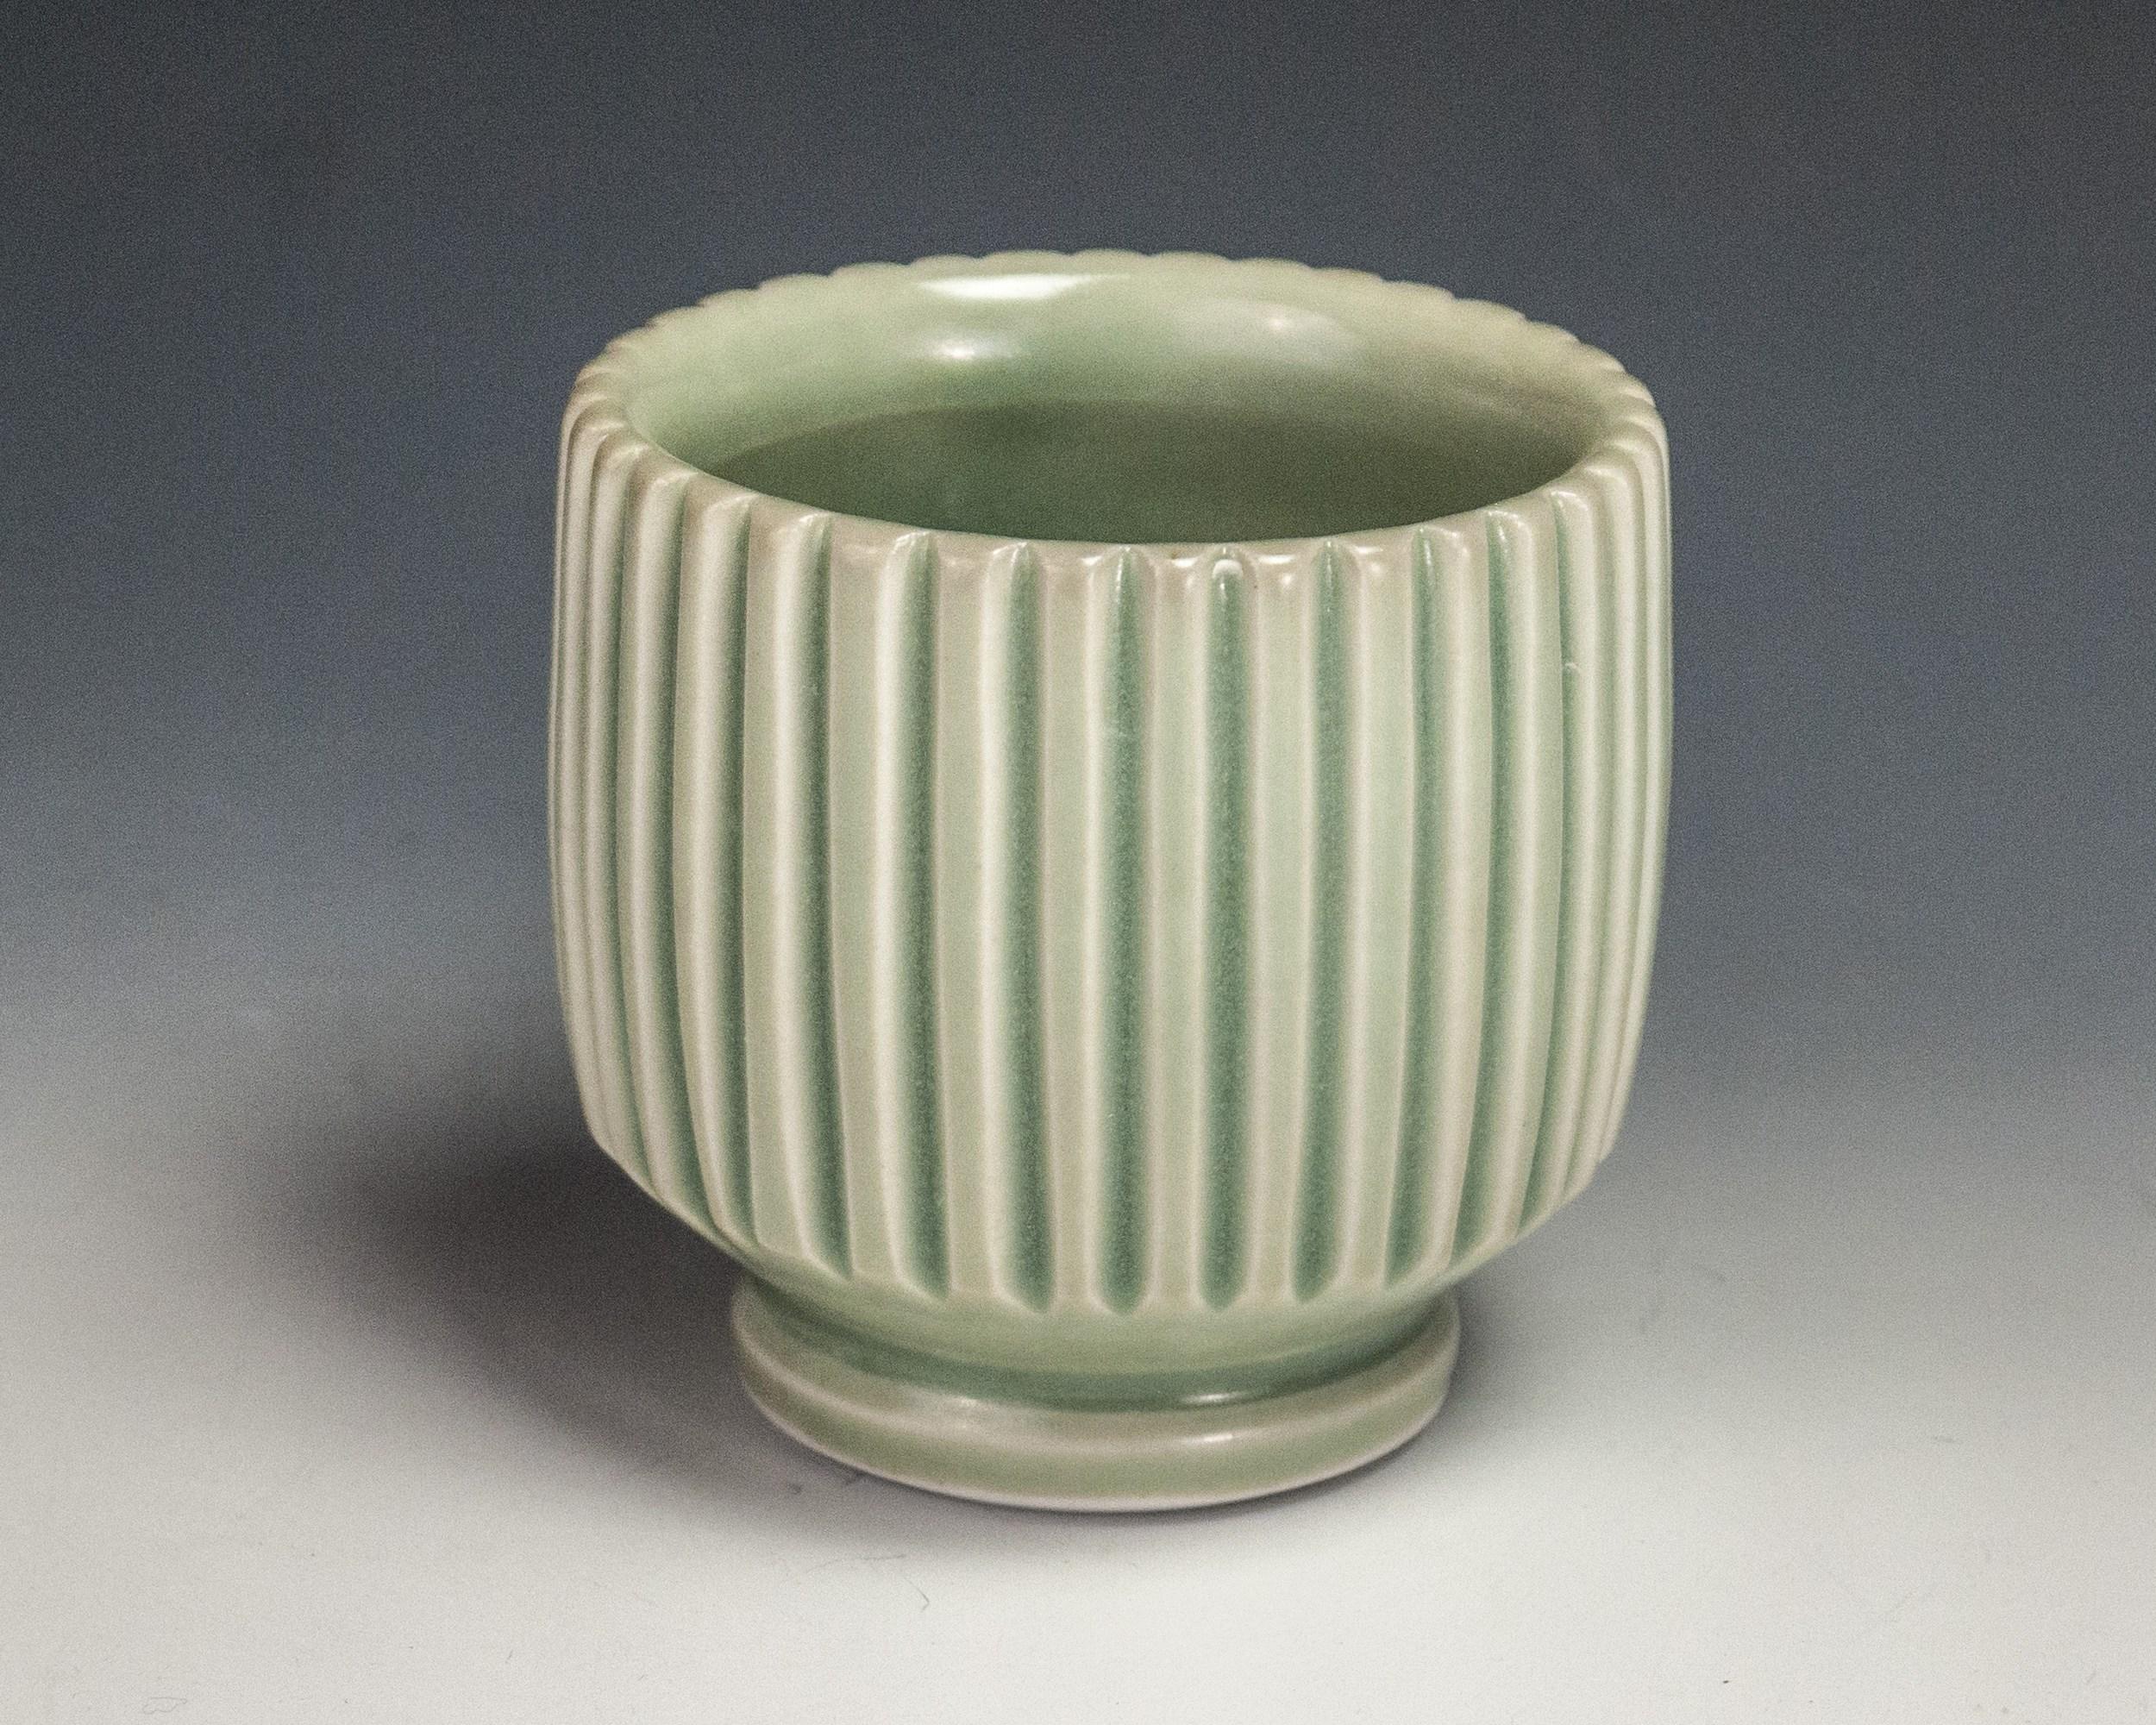 Carved Green Cup